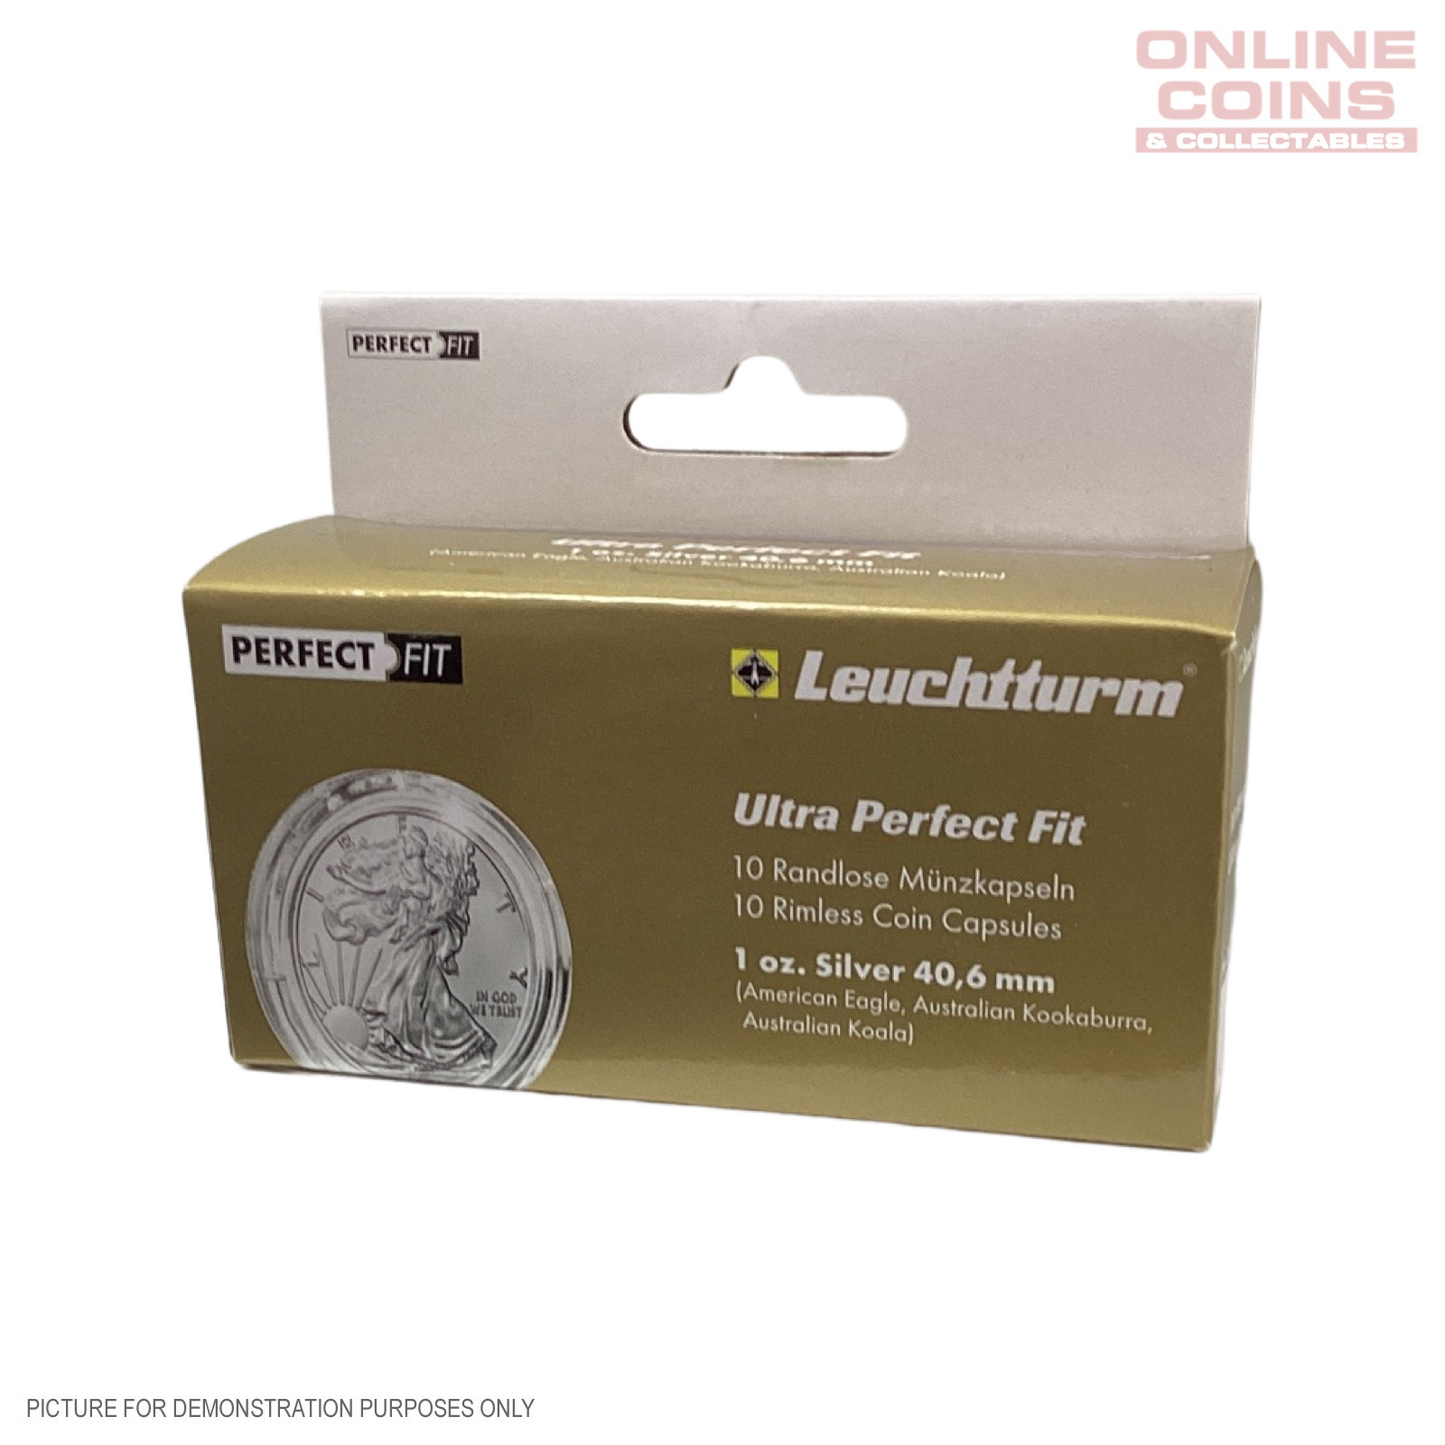 Lighthouse ULTRA PERFECT FIT 40.6mm Coin Capsules - Suit 1oz Silver American Eagle